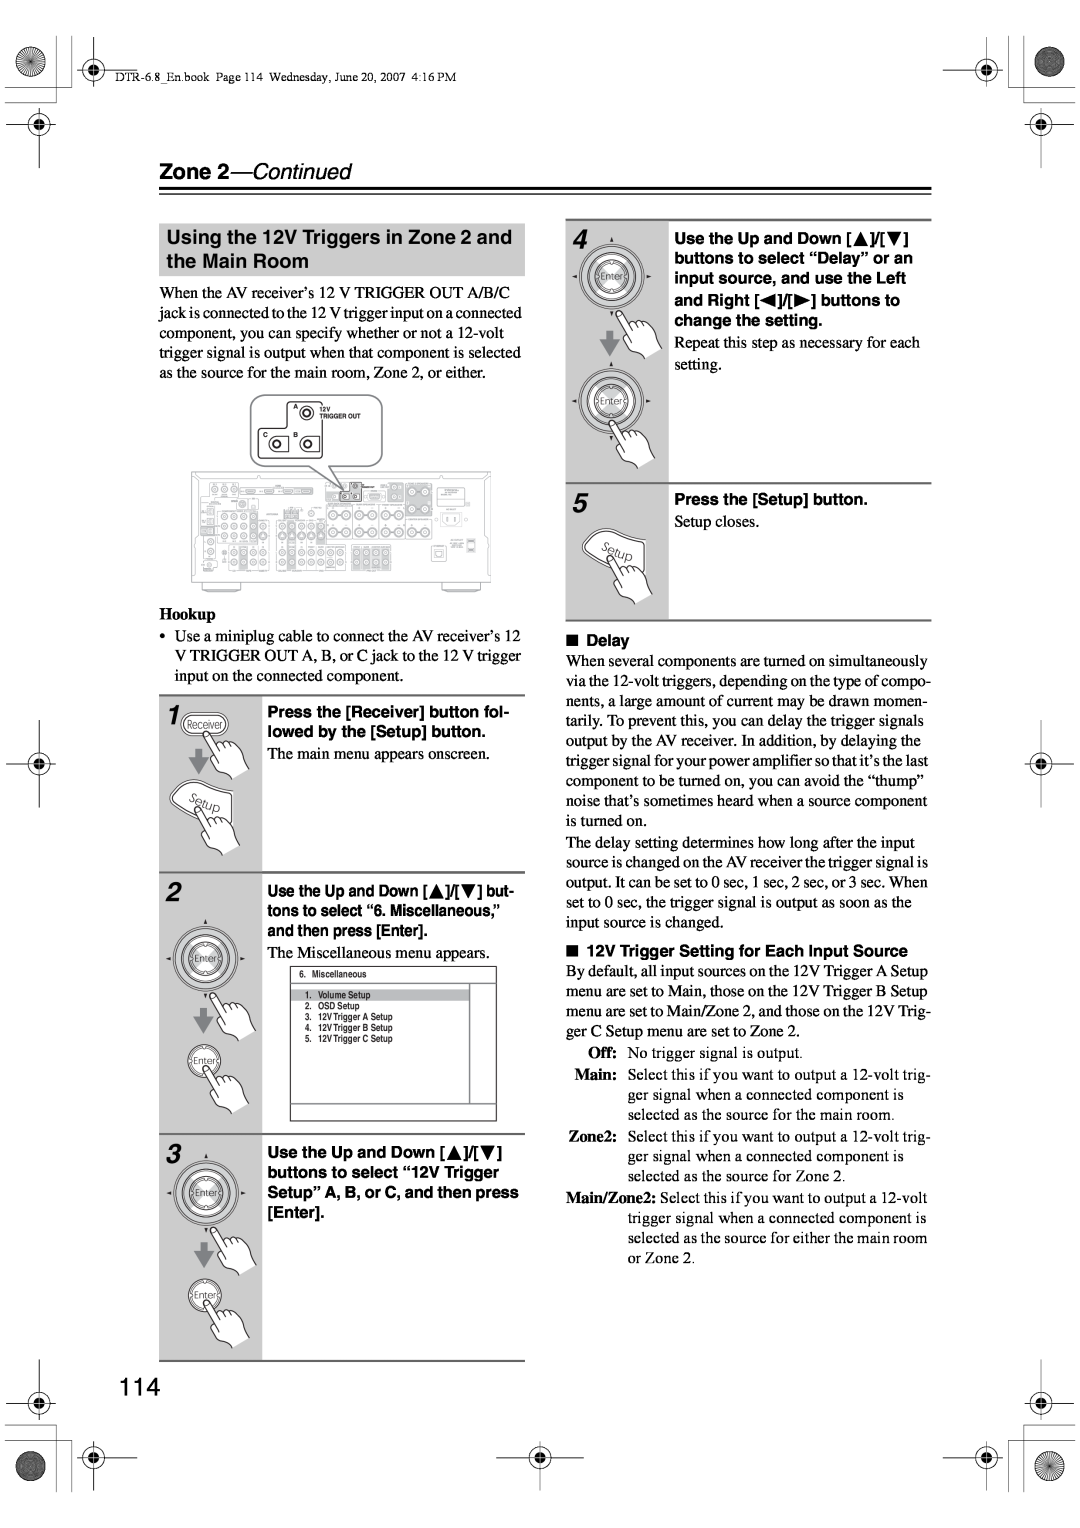 Integra DTR-6.8 instruction manual Using the 12V Triggers in Zone 2 and, the Main Room, Zone 2—Continued, Hookup 